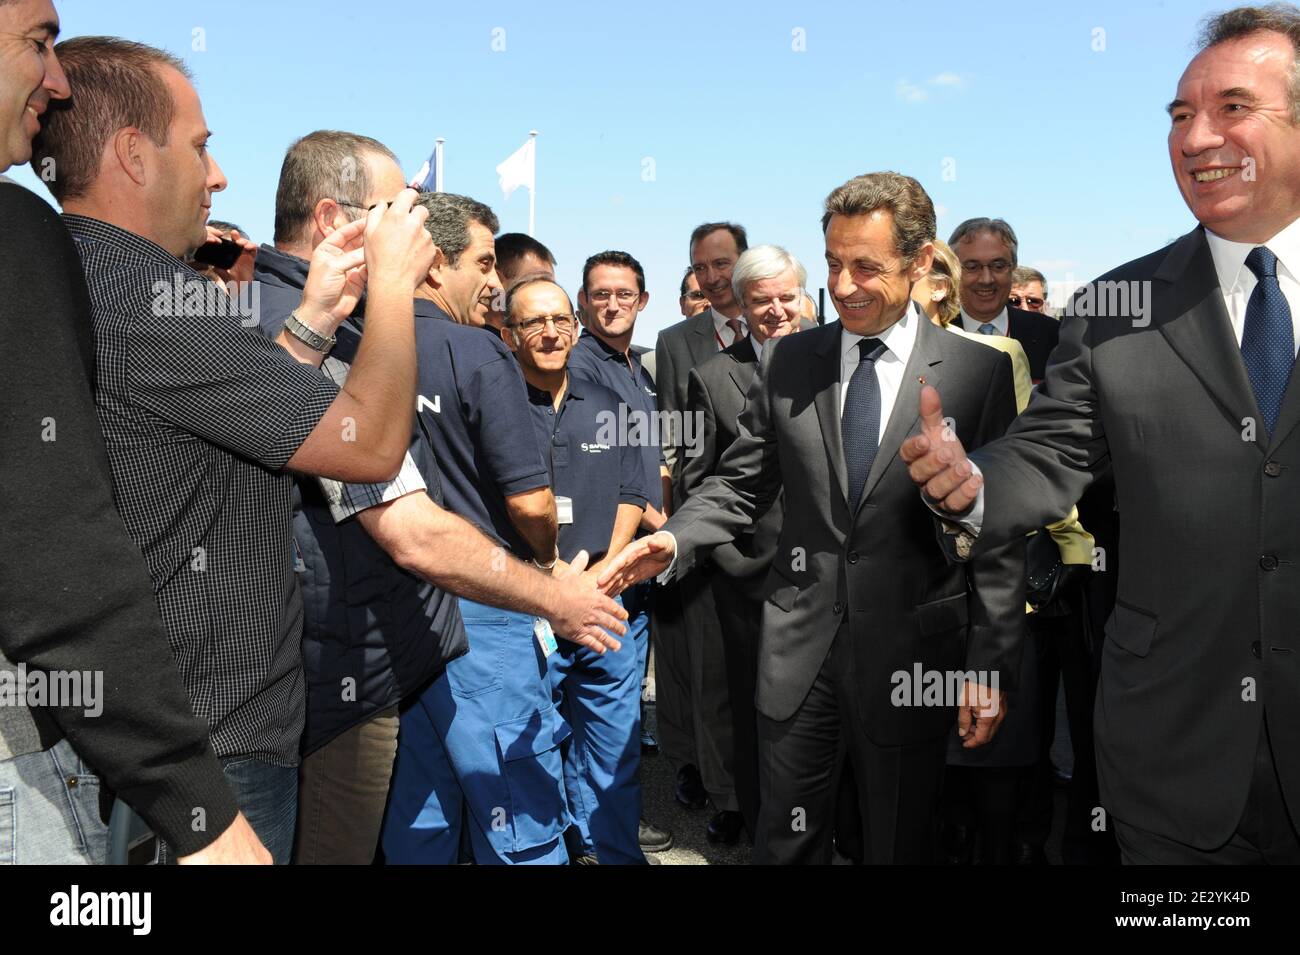 French President Nicolas Sarkozy flanked by Francois Bayrou inaugurates  Turbomeca's Joseph Szydlowski plant in a ceremony attended by Jean Paul  Herteman, CRO of Safran, and Pierre Fabre, Chairman and Ceo of Turbomeca,